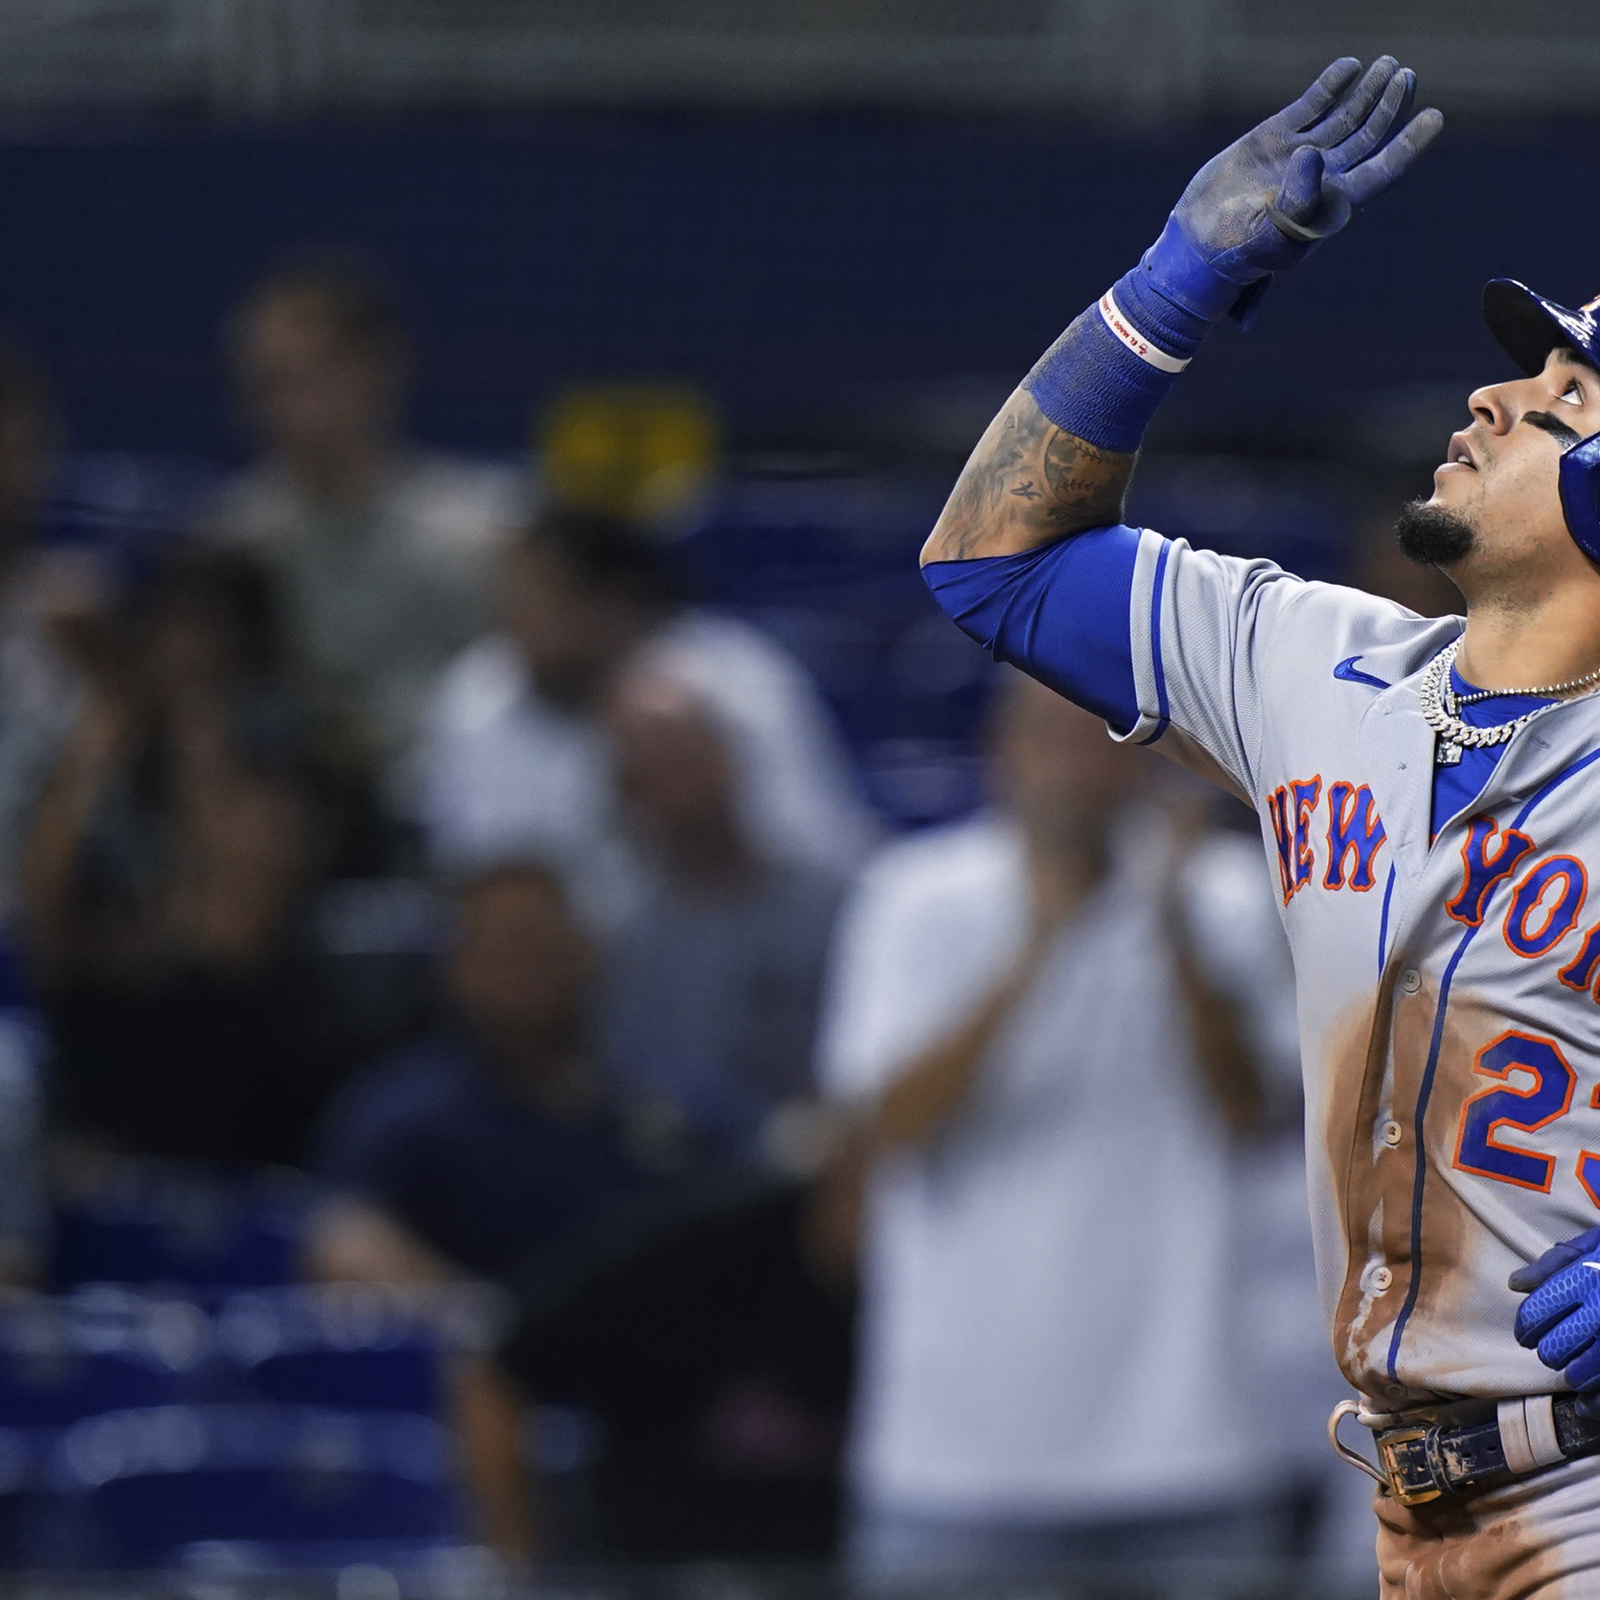 Javier Báez Introduced as a New York Met, Mets News Conference